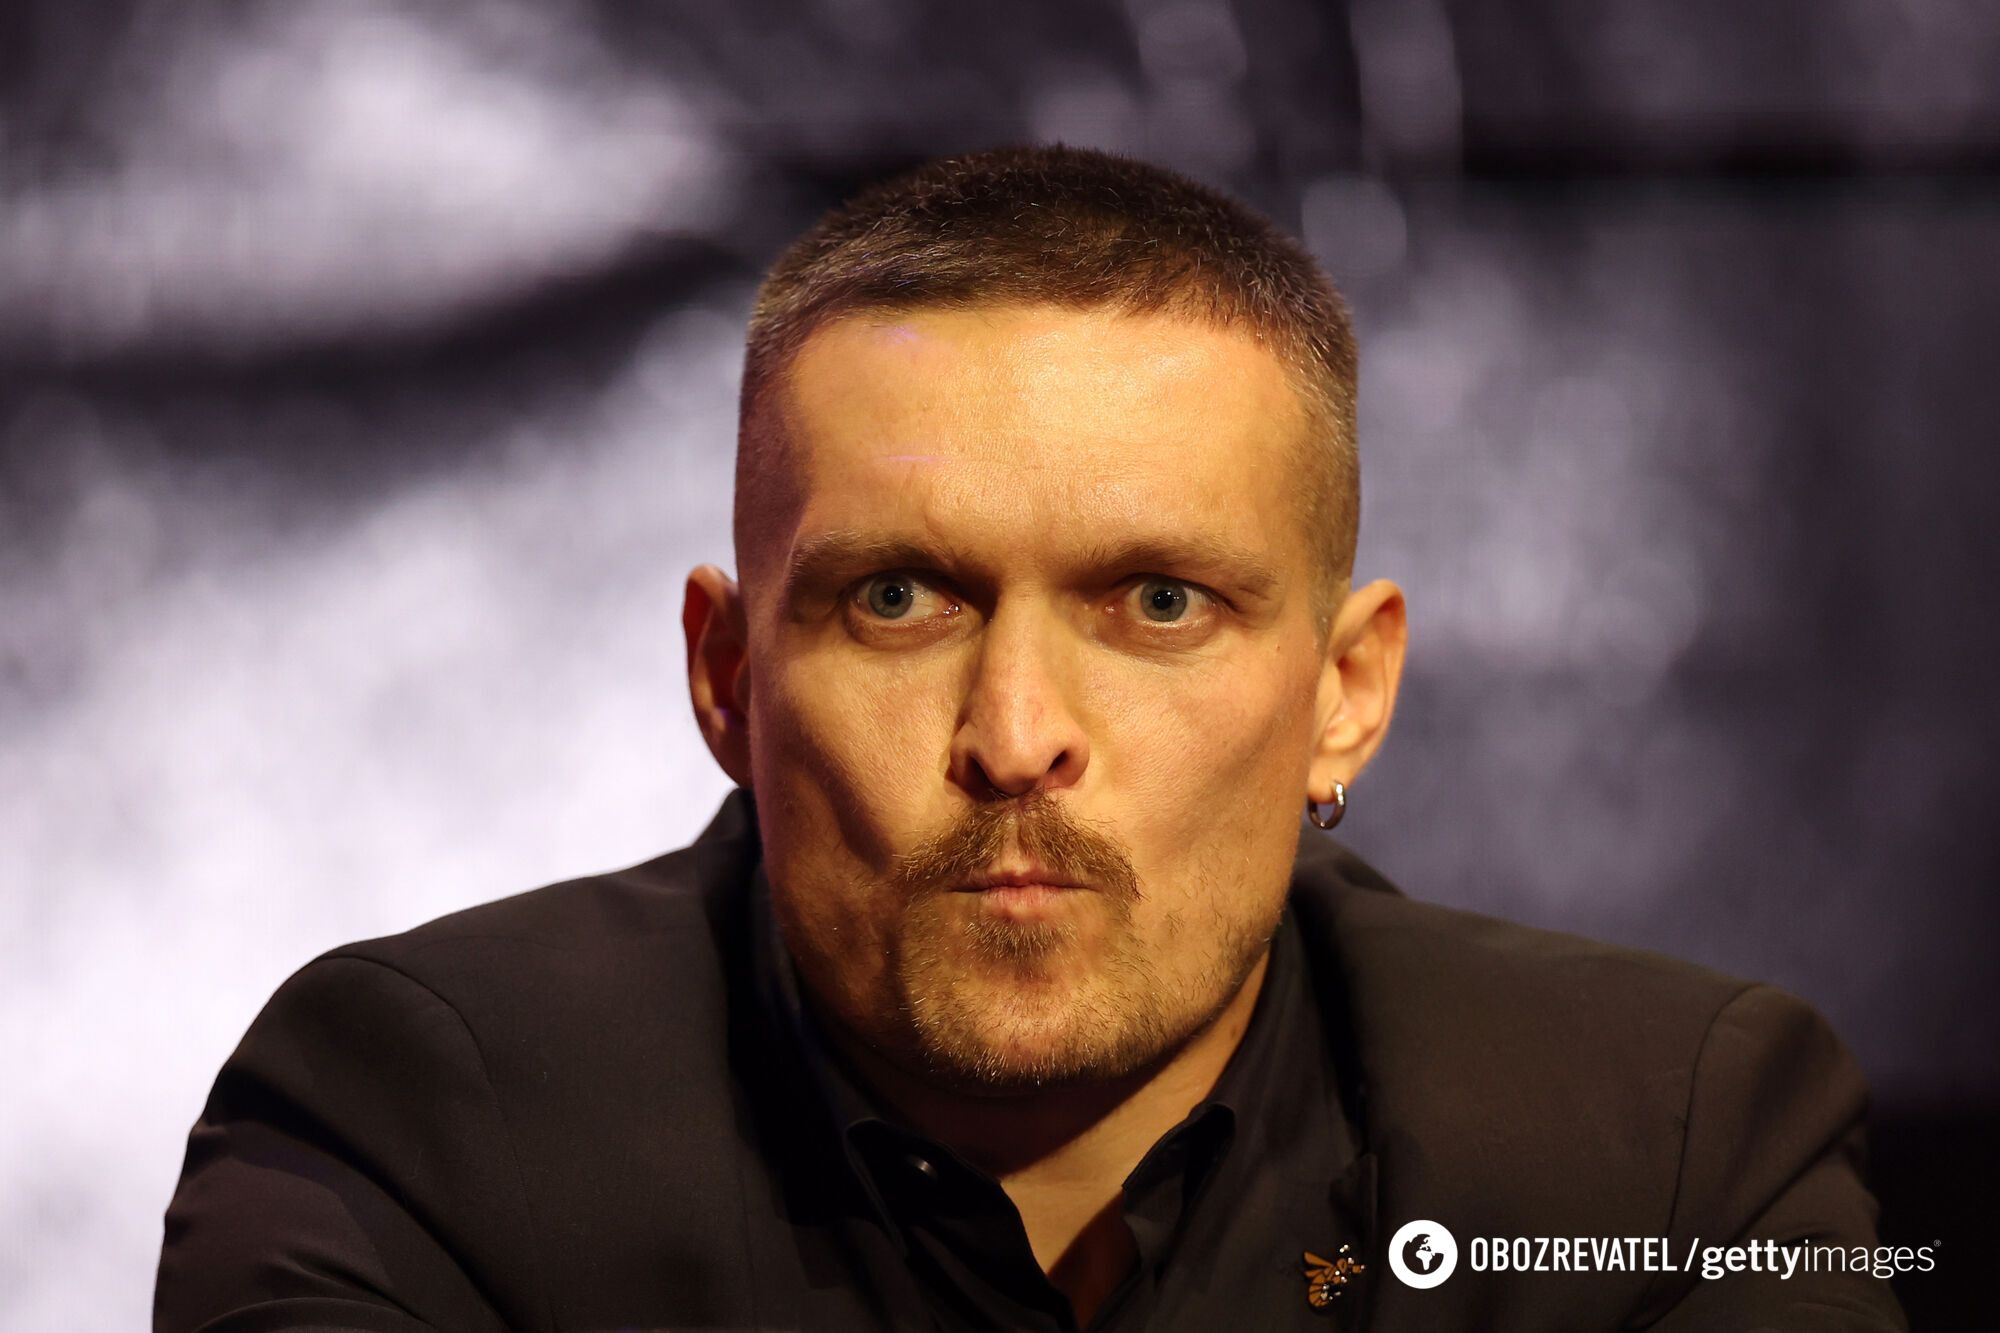 Usyk - Fury: bookmakers reacted unexpectedly to the fight postponement by updating one of the quotes